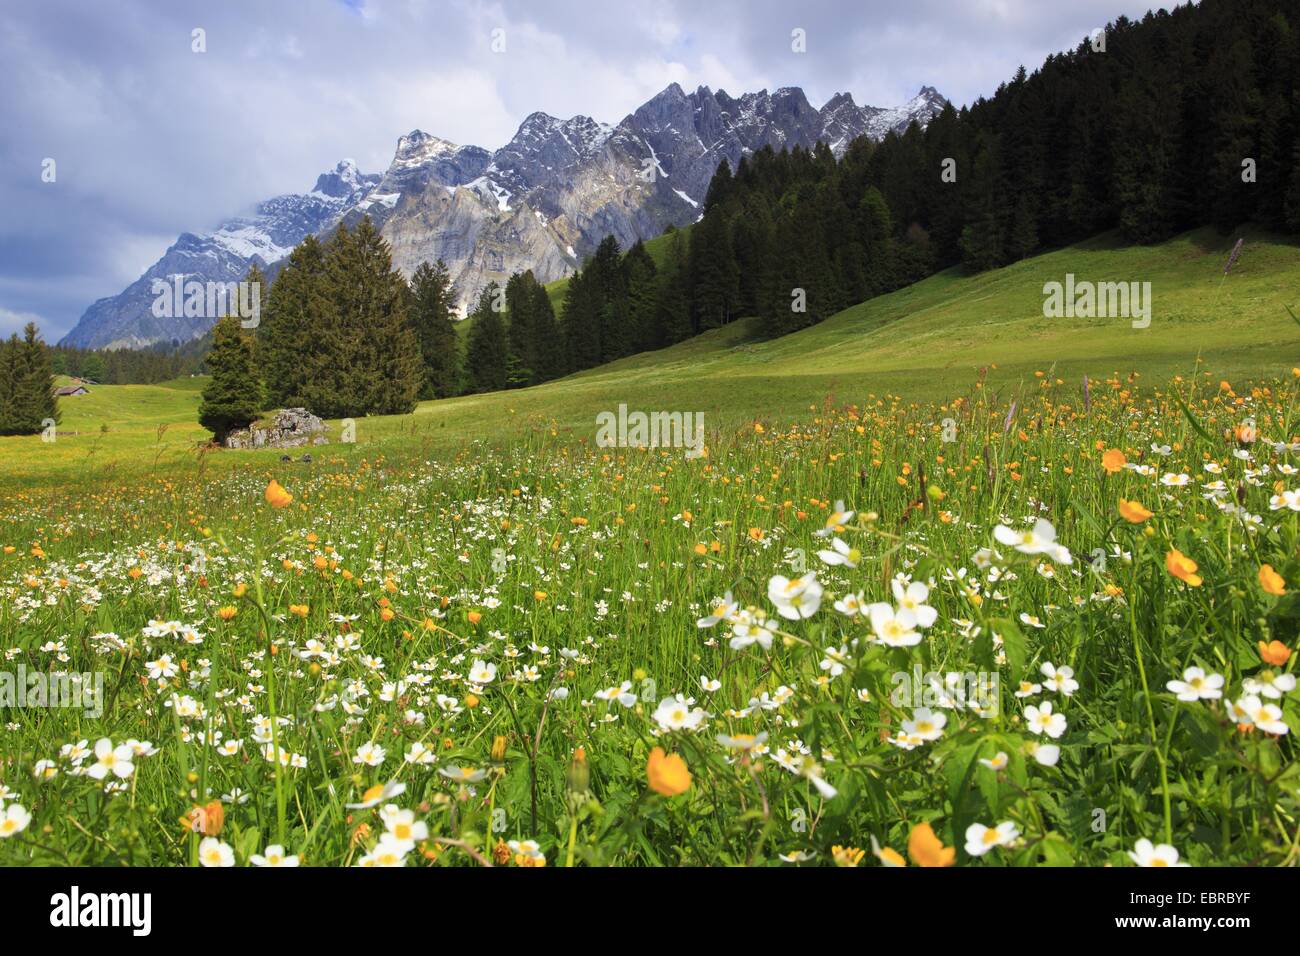 aconite-leaf buttercup (Ranunculus aconitifolius), view from a mountain meadow at the Alpstein massif with the highest mountain Saentis (2502 m), Switzerland Stock Photo